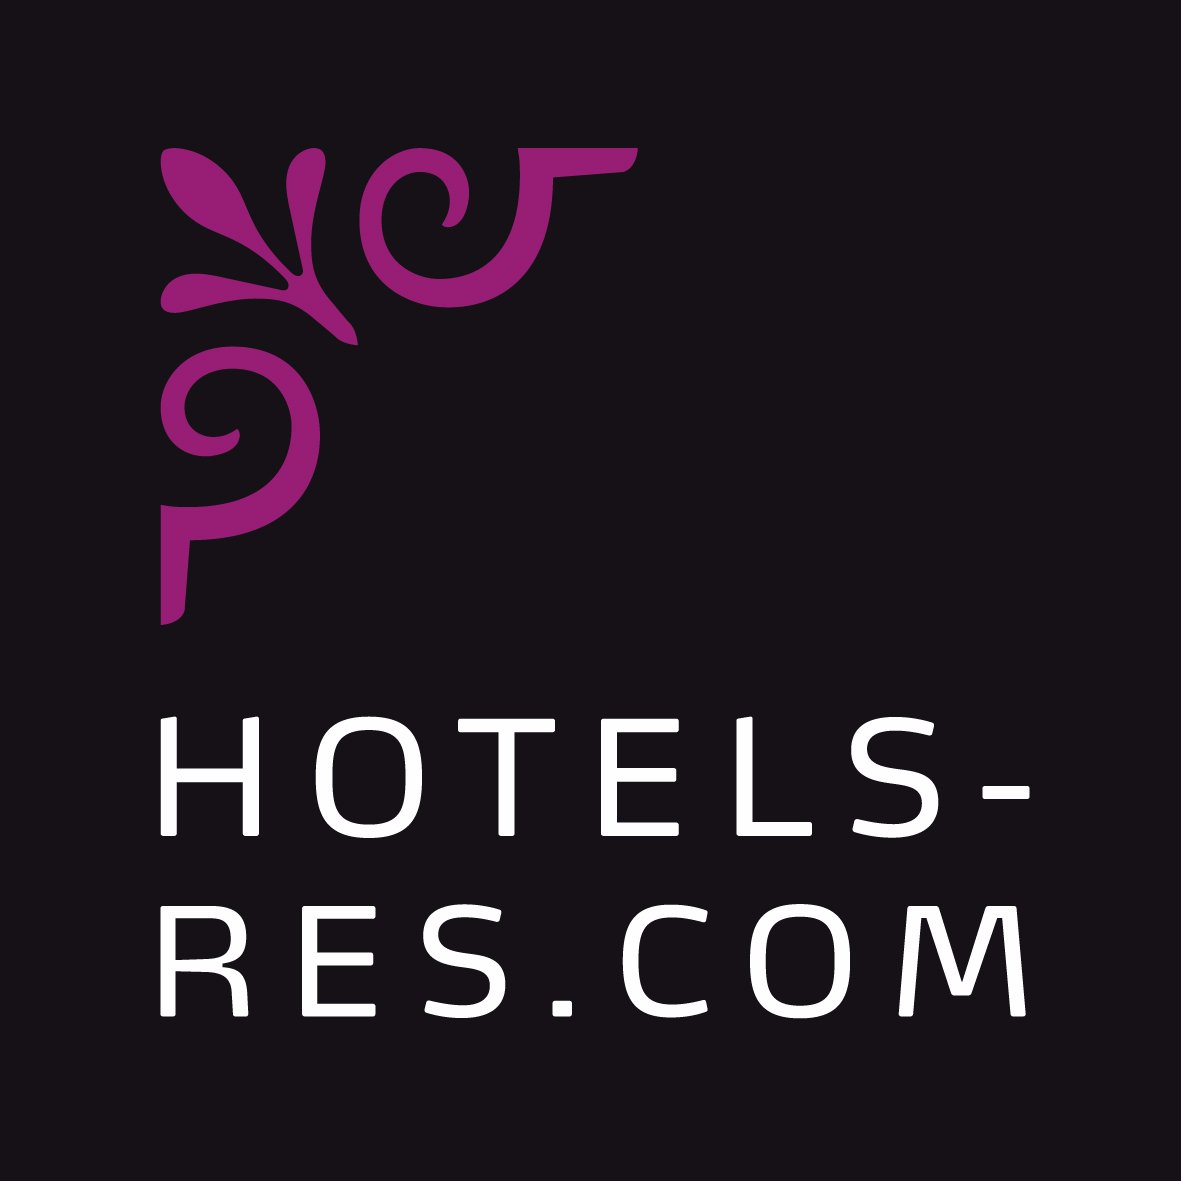 Parisian hotel network with 3 and 4 stars franchised hotels. Elegant rooms - Conference spaces - Event support.